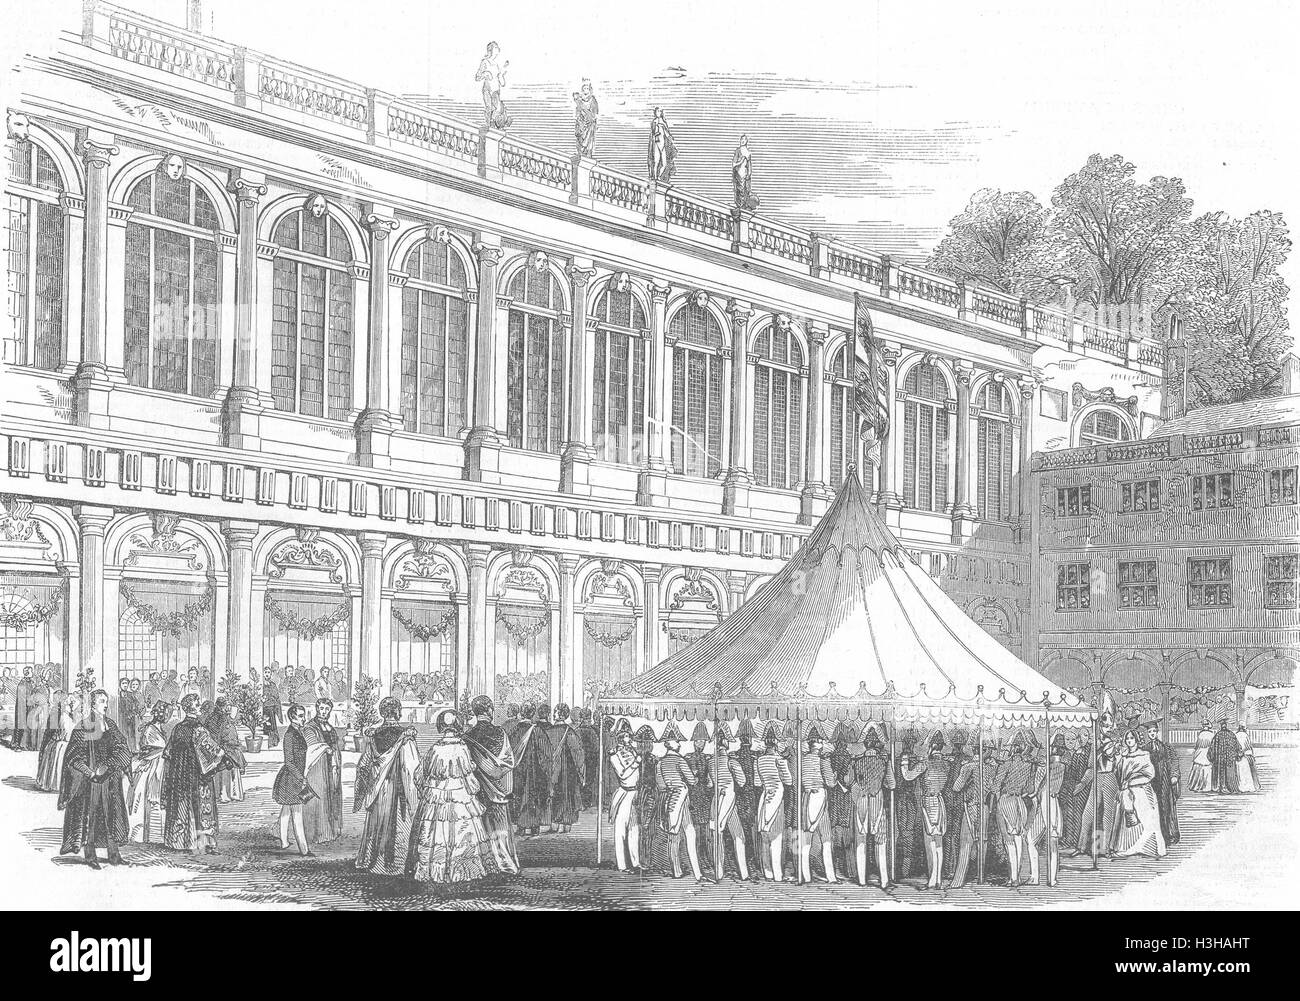 CAMBS breakfast below cloisters of Neville's-Ct 1847. Illustrated London News Stock Photo